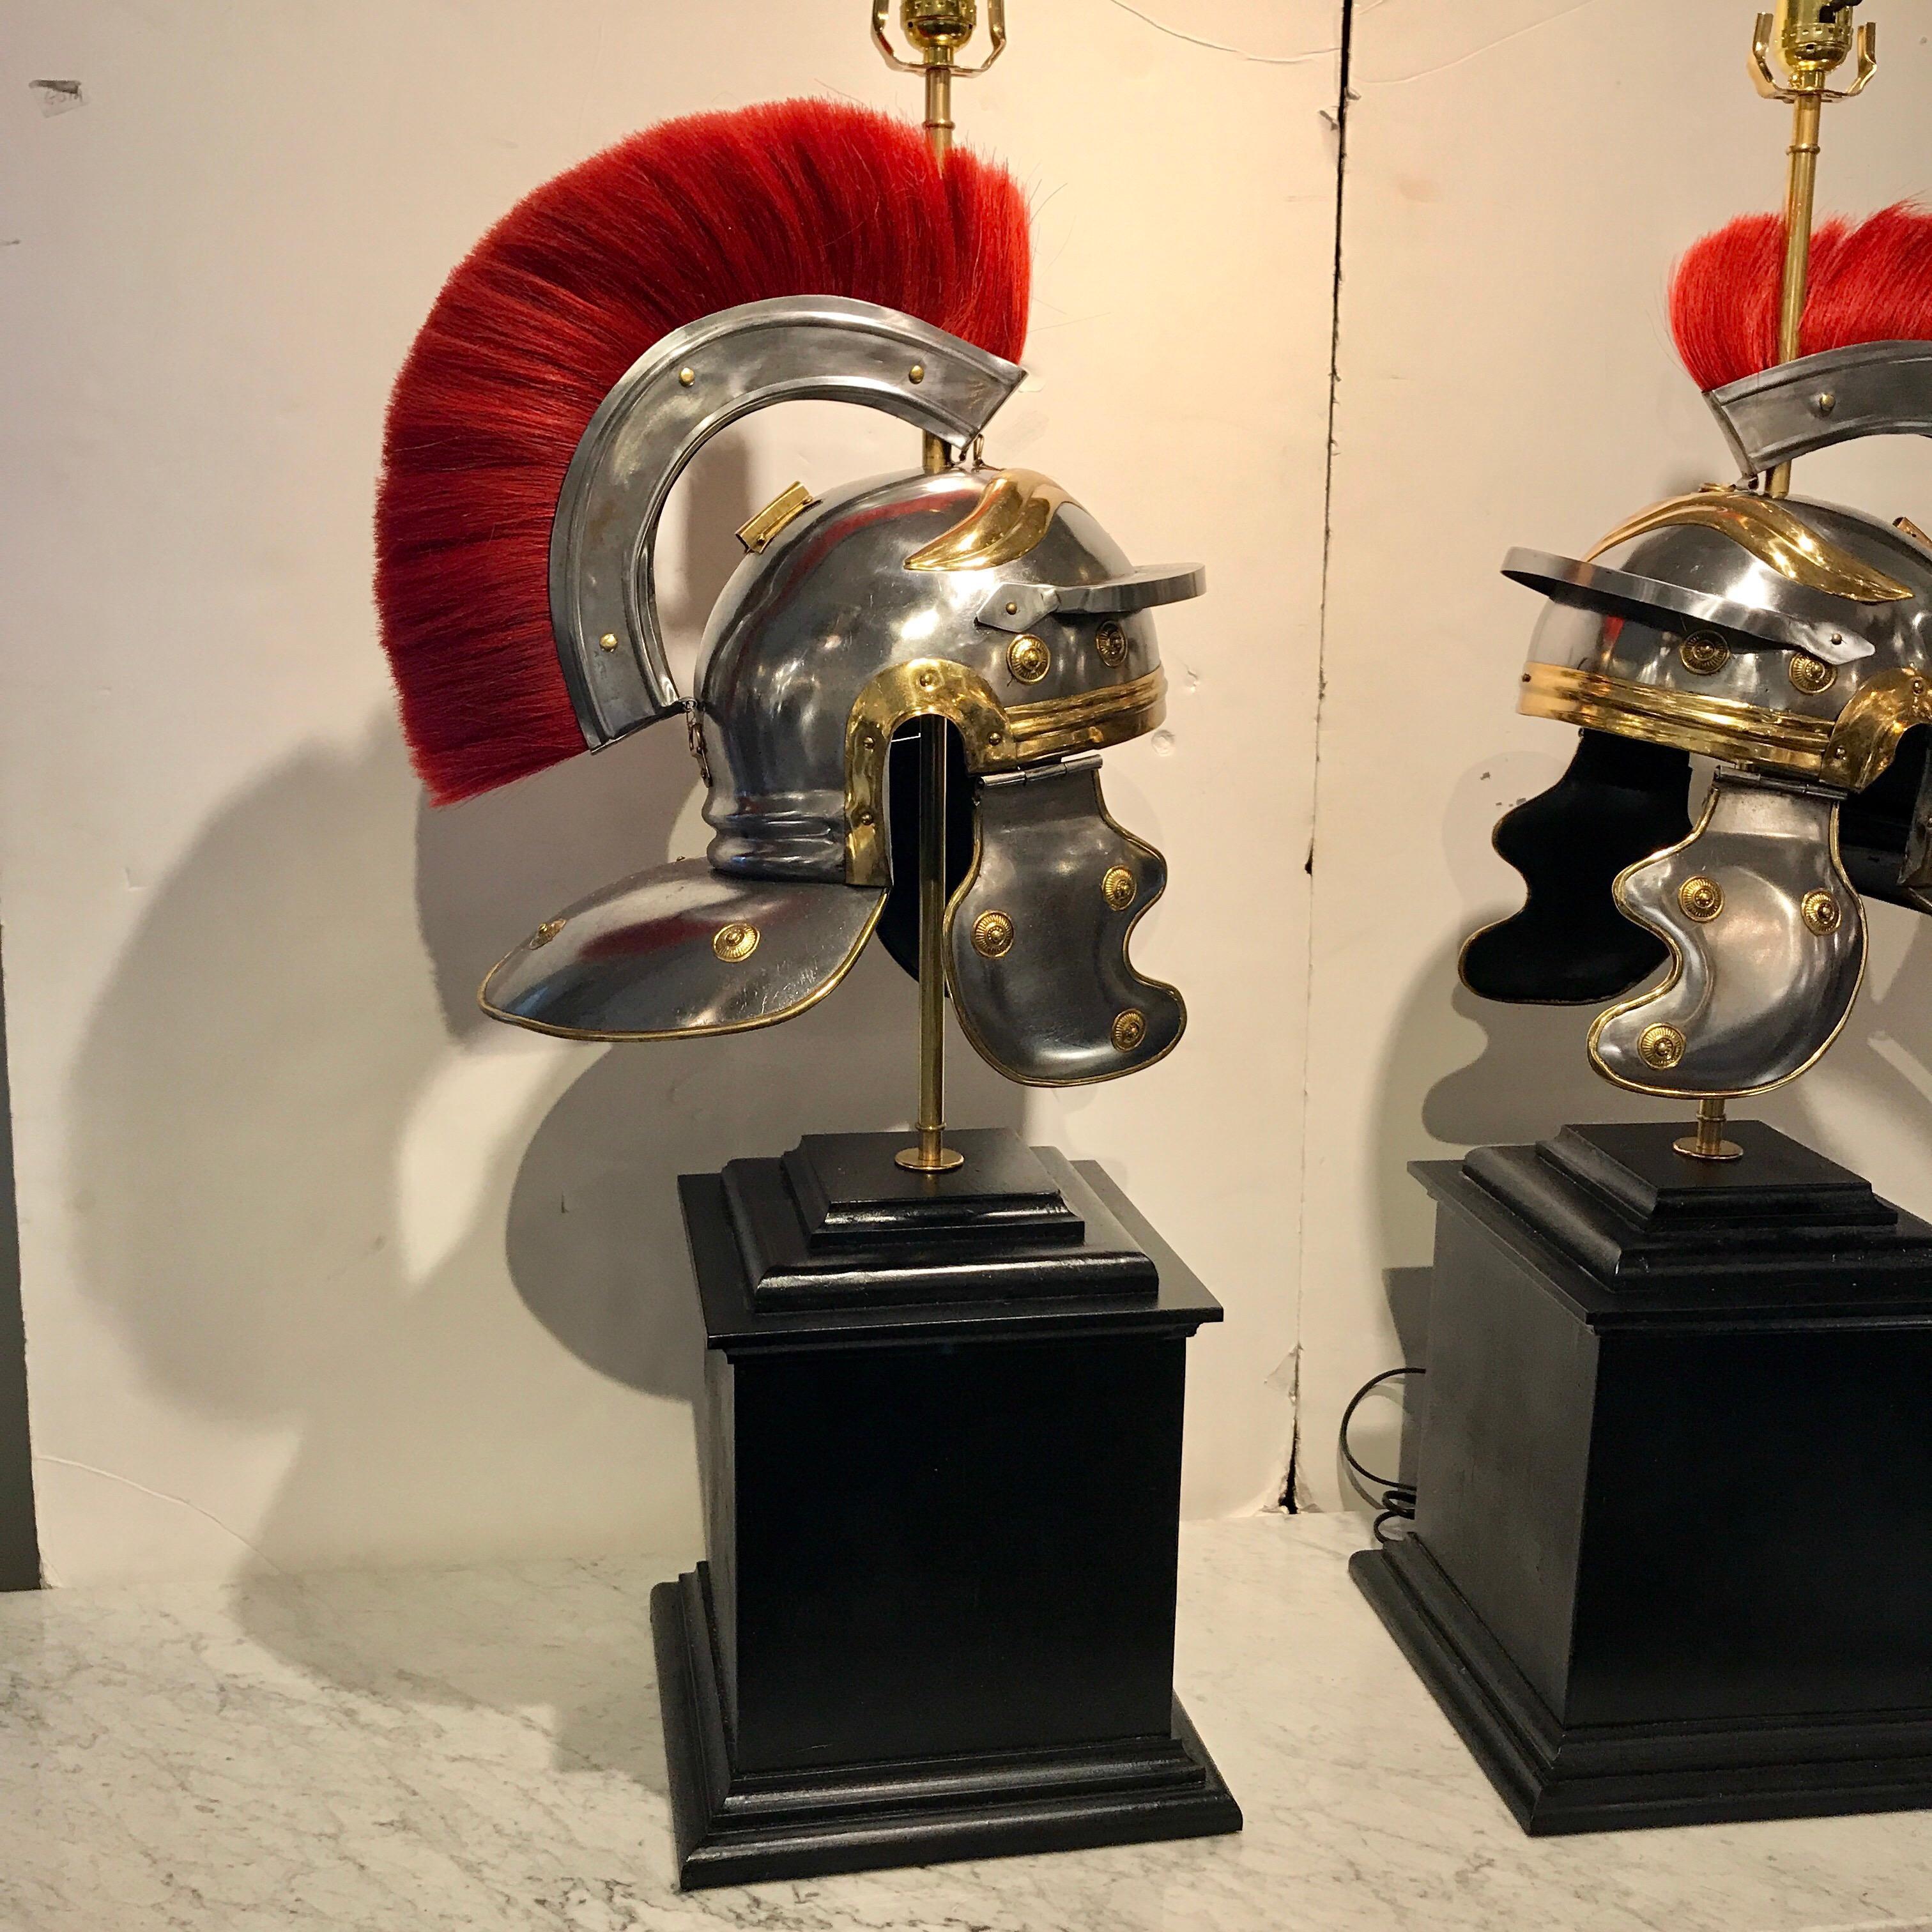 A pair of Grand Tour steel and brass Roman helmets, now as lamps. Each one with red plume on a realistically modelled Roman helmet made of polished and satin steel, with brass mounts. Raised on 12-inch square ebonized wood pedestal bases.
The